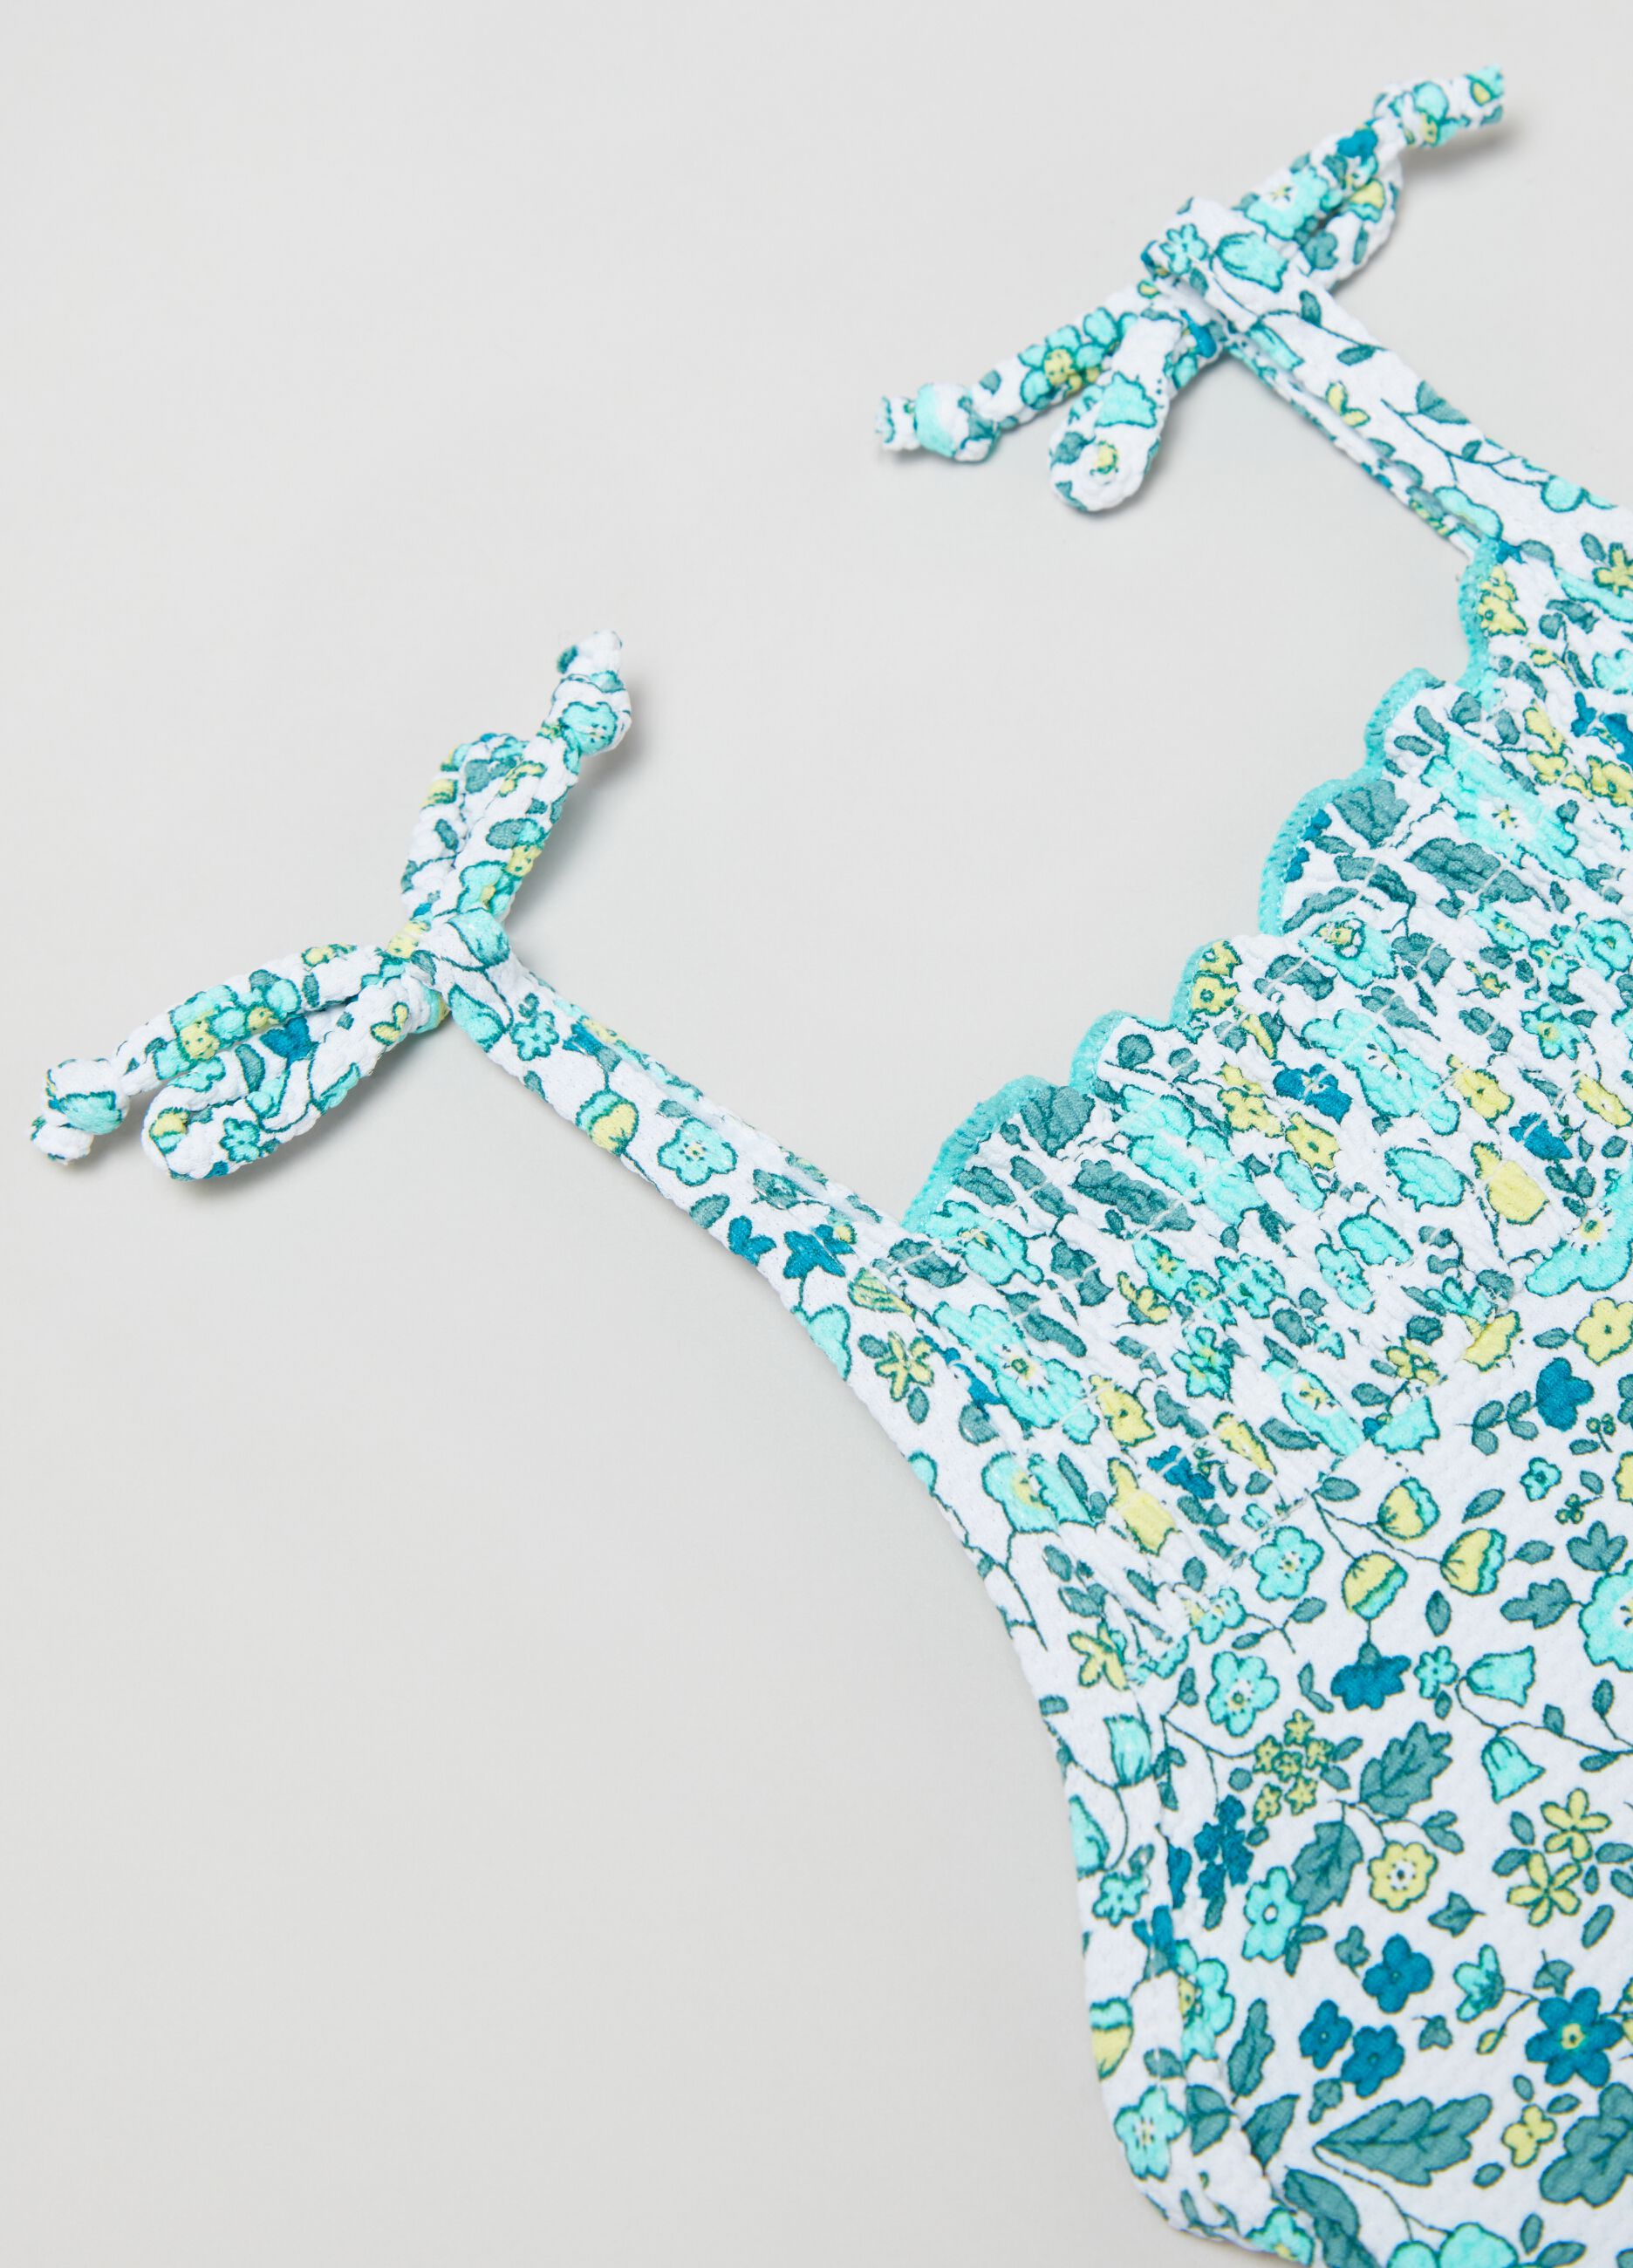 One-piece floral swimsuit